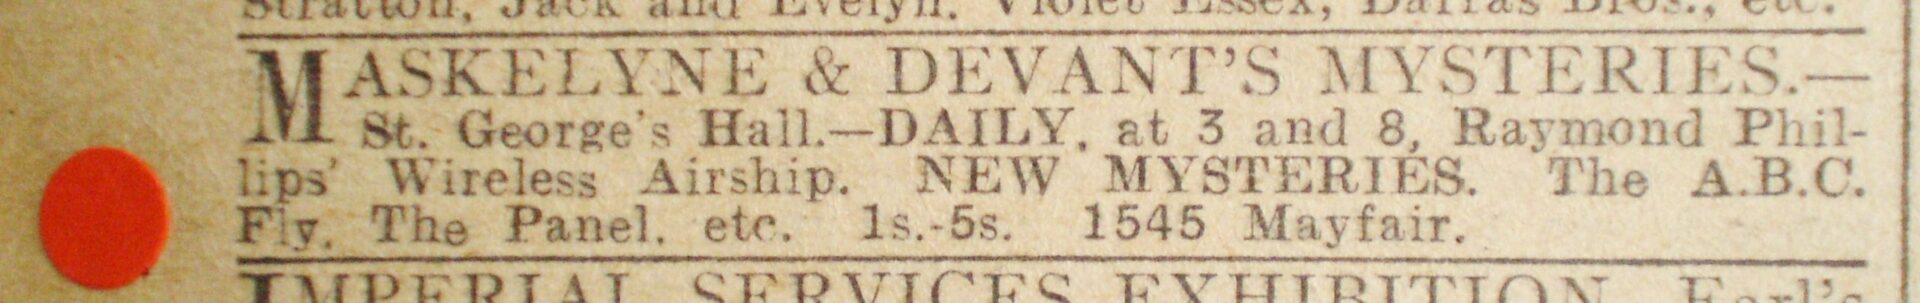 ‘The Daily Mirror’ with an advertisement for Maskelyne & Devant’s Mysteries at St. George’s Hall